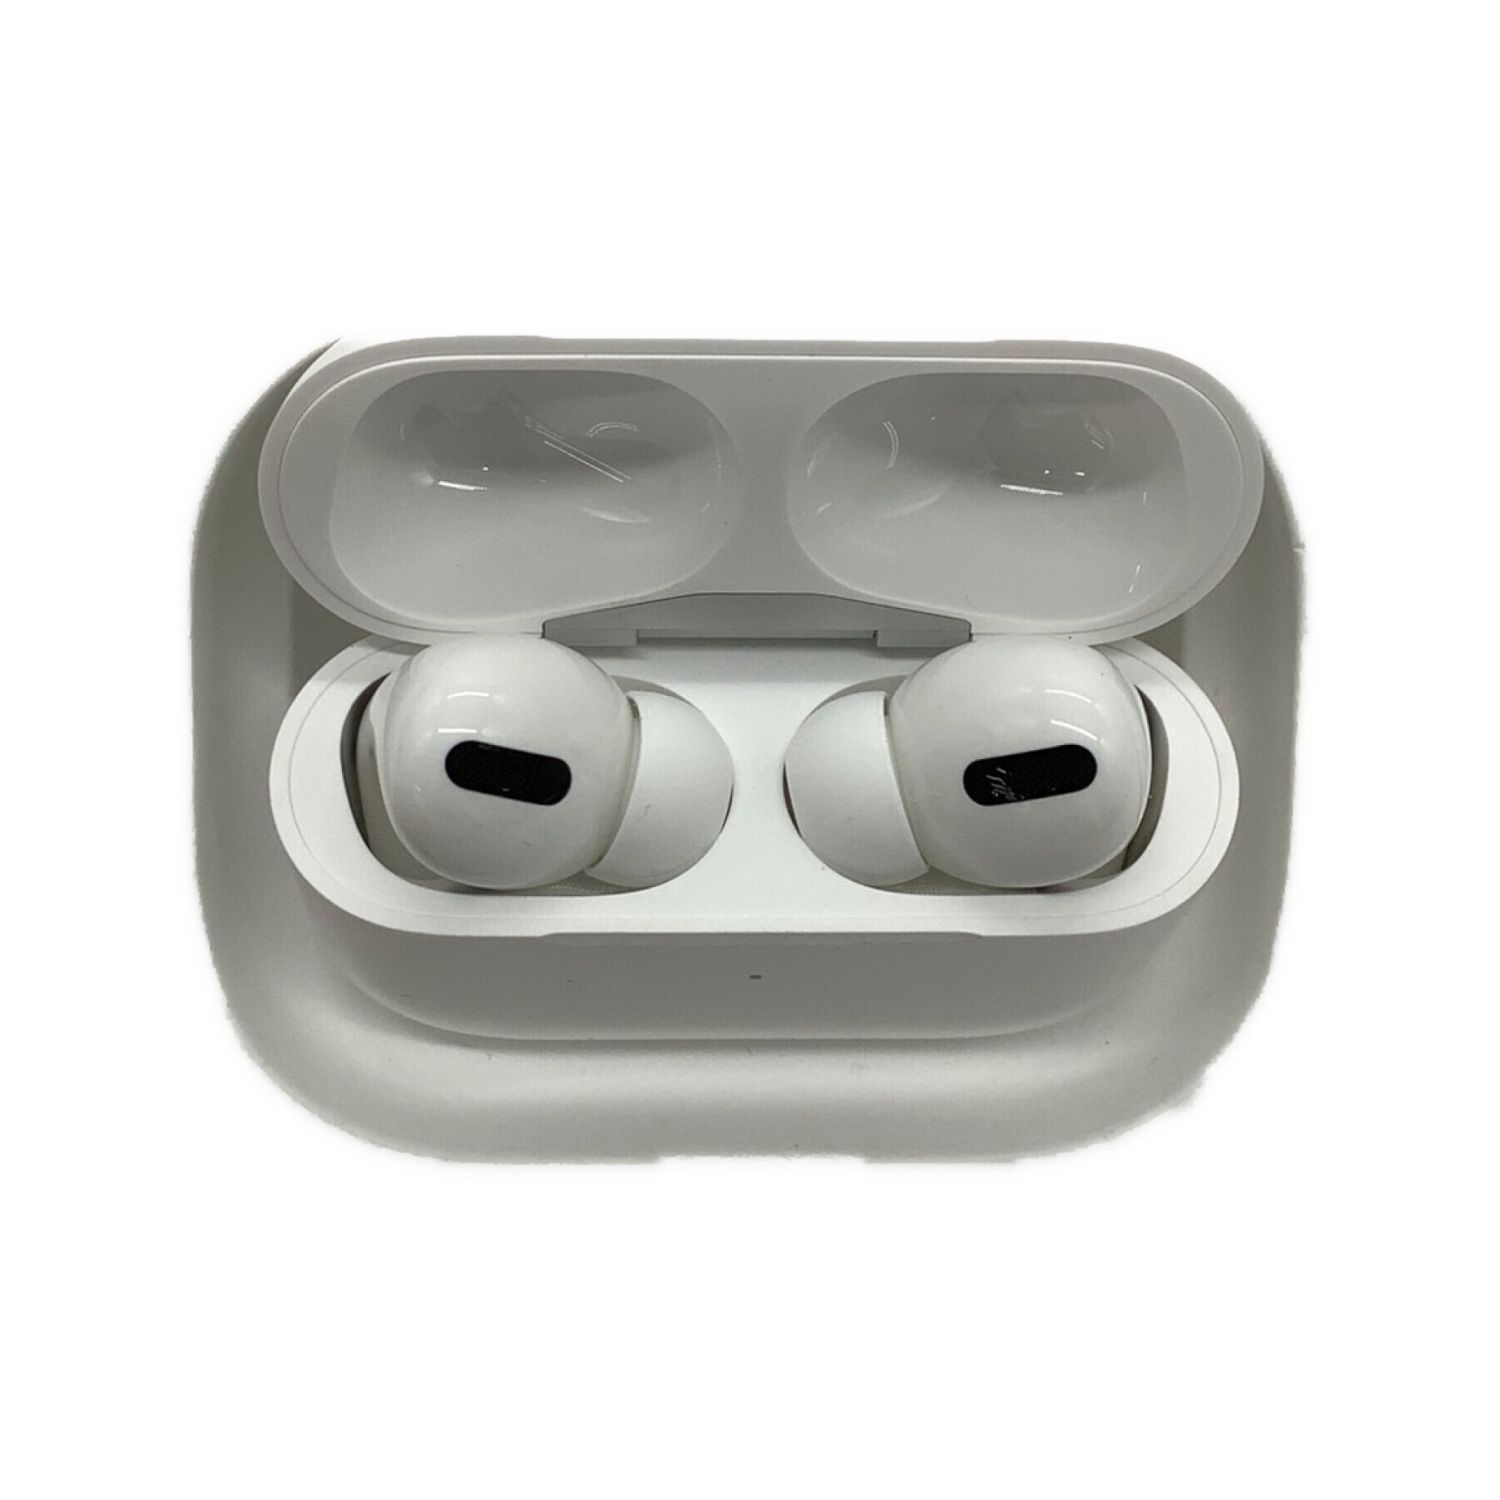 airpods Apple AirPods ケースのみ【美品】動作保証